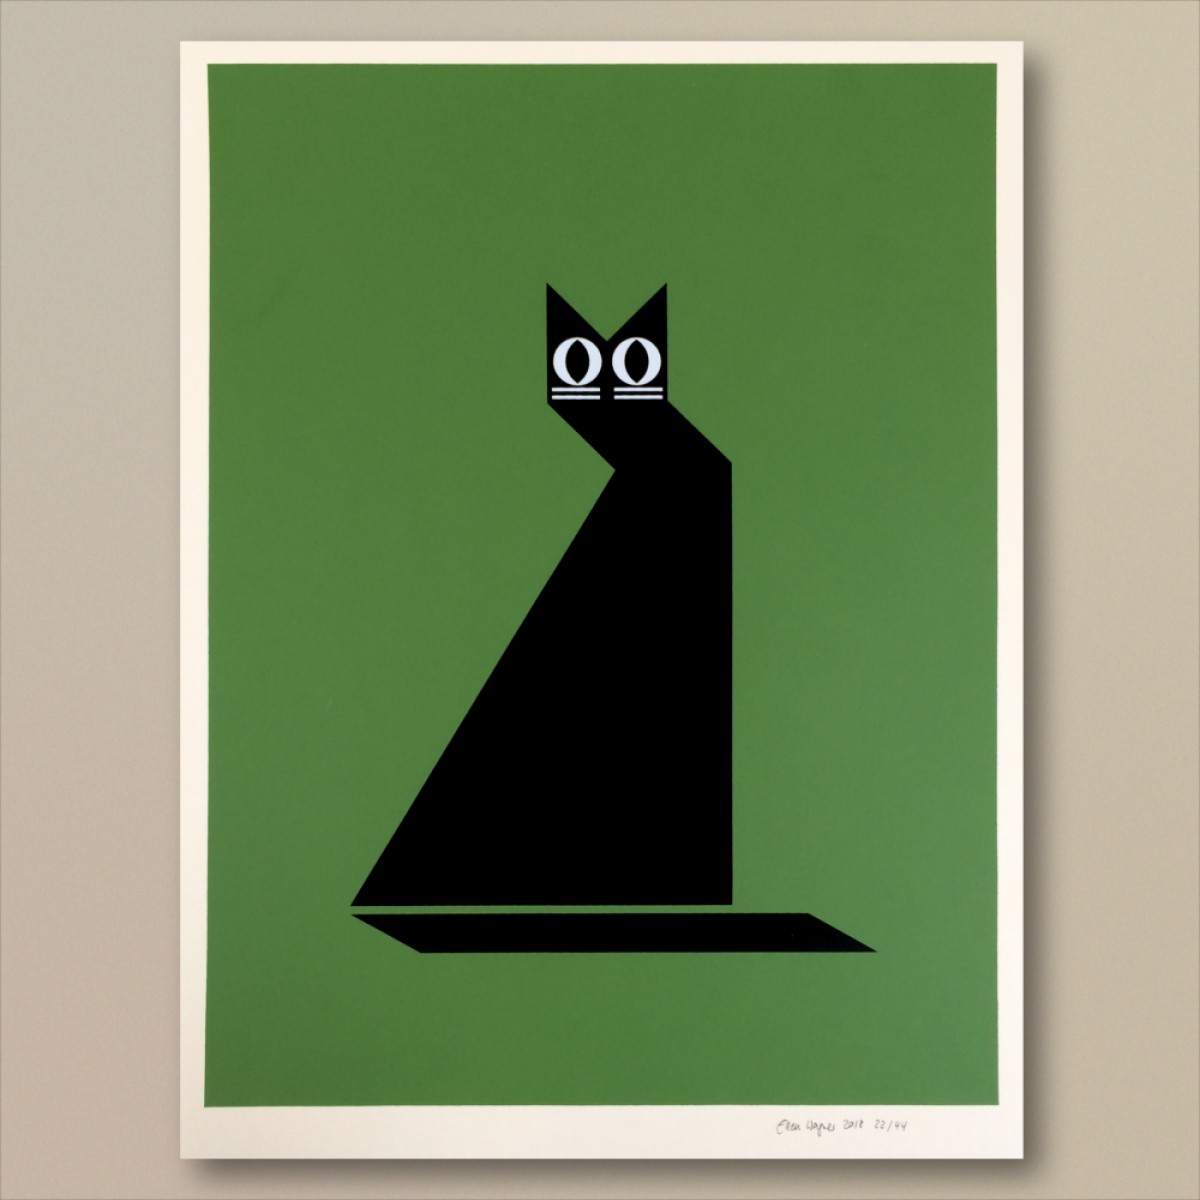 Print now - Riot later ● Abstract Cat Siebdruck